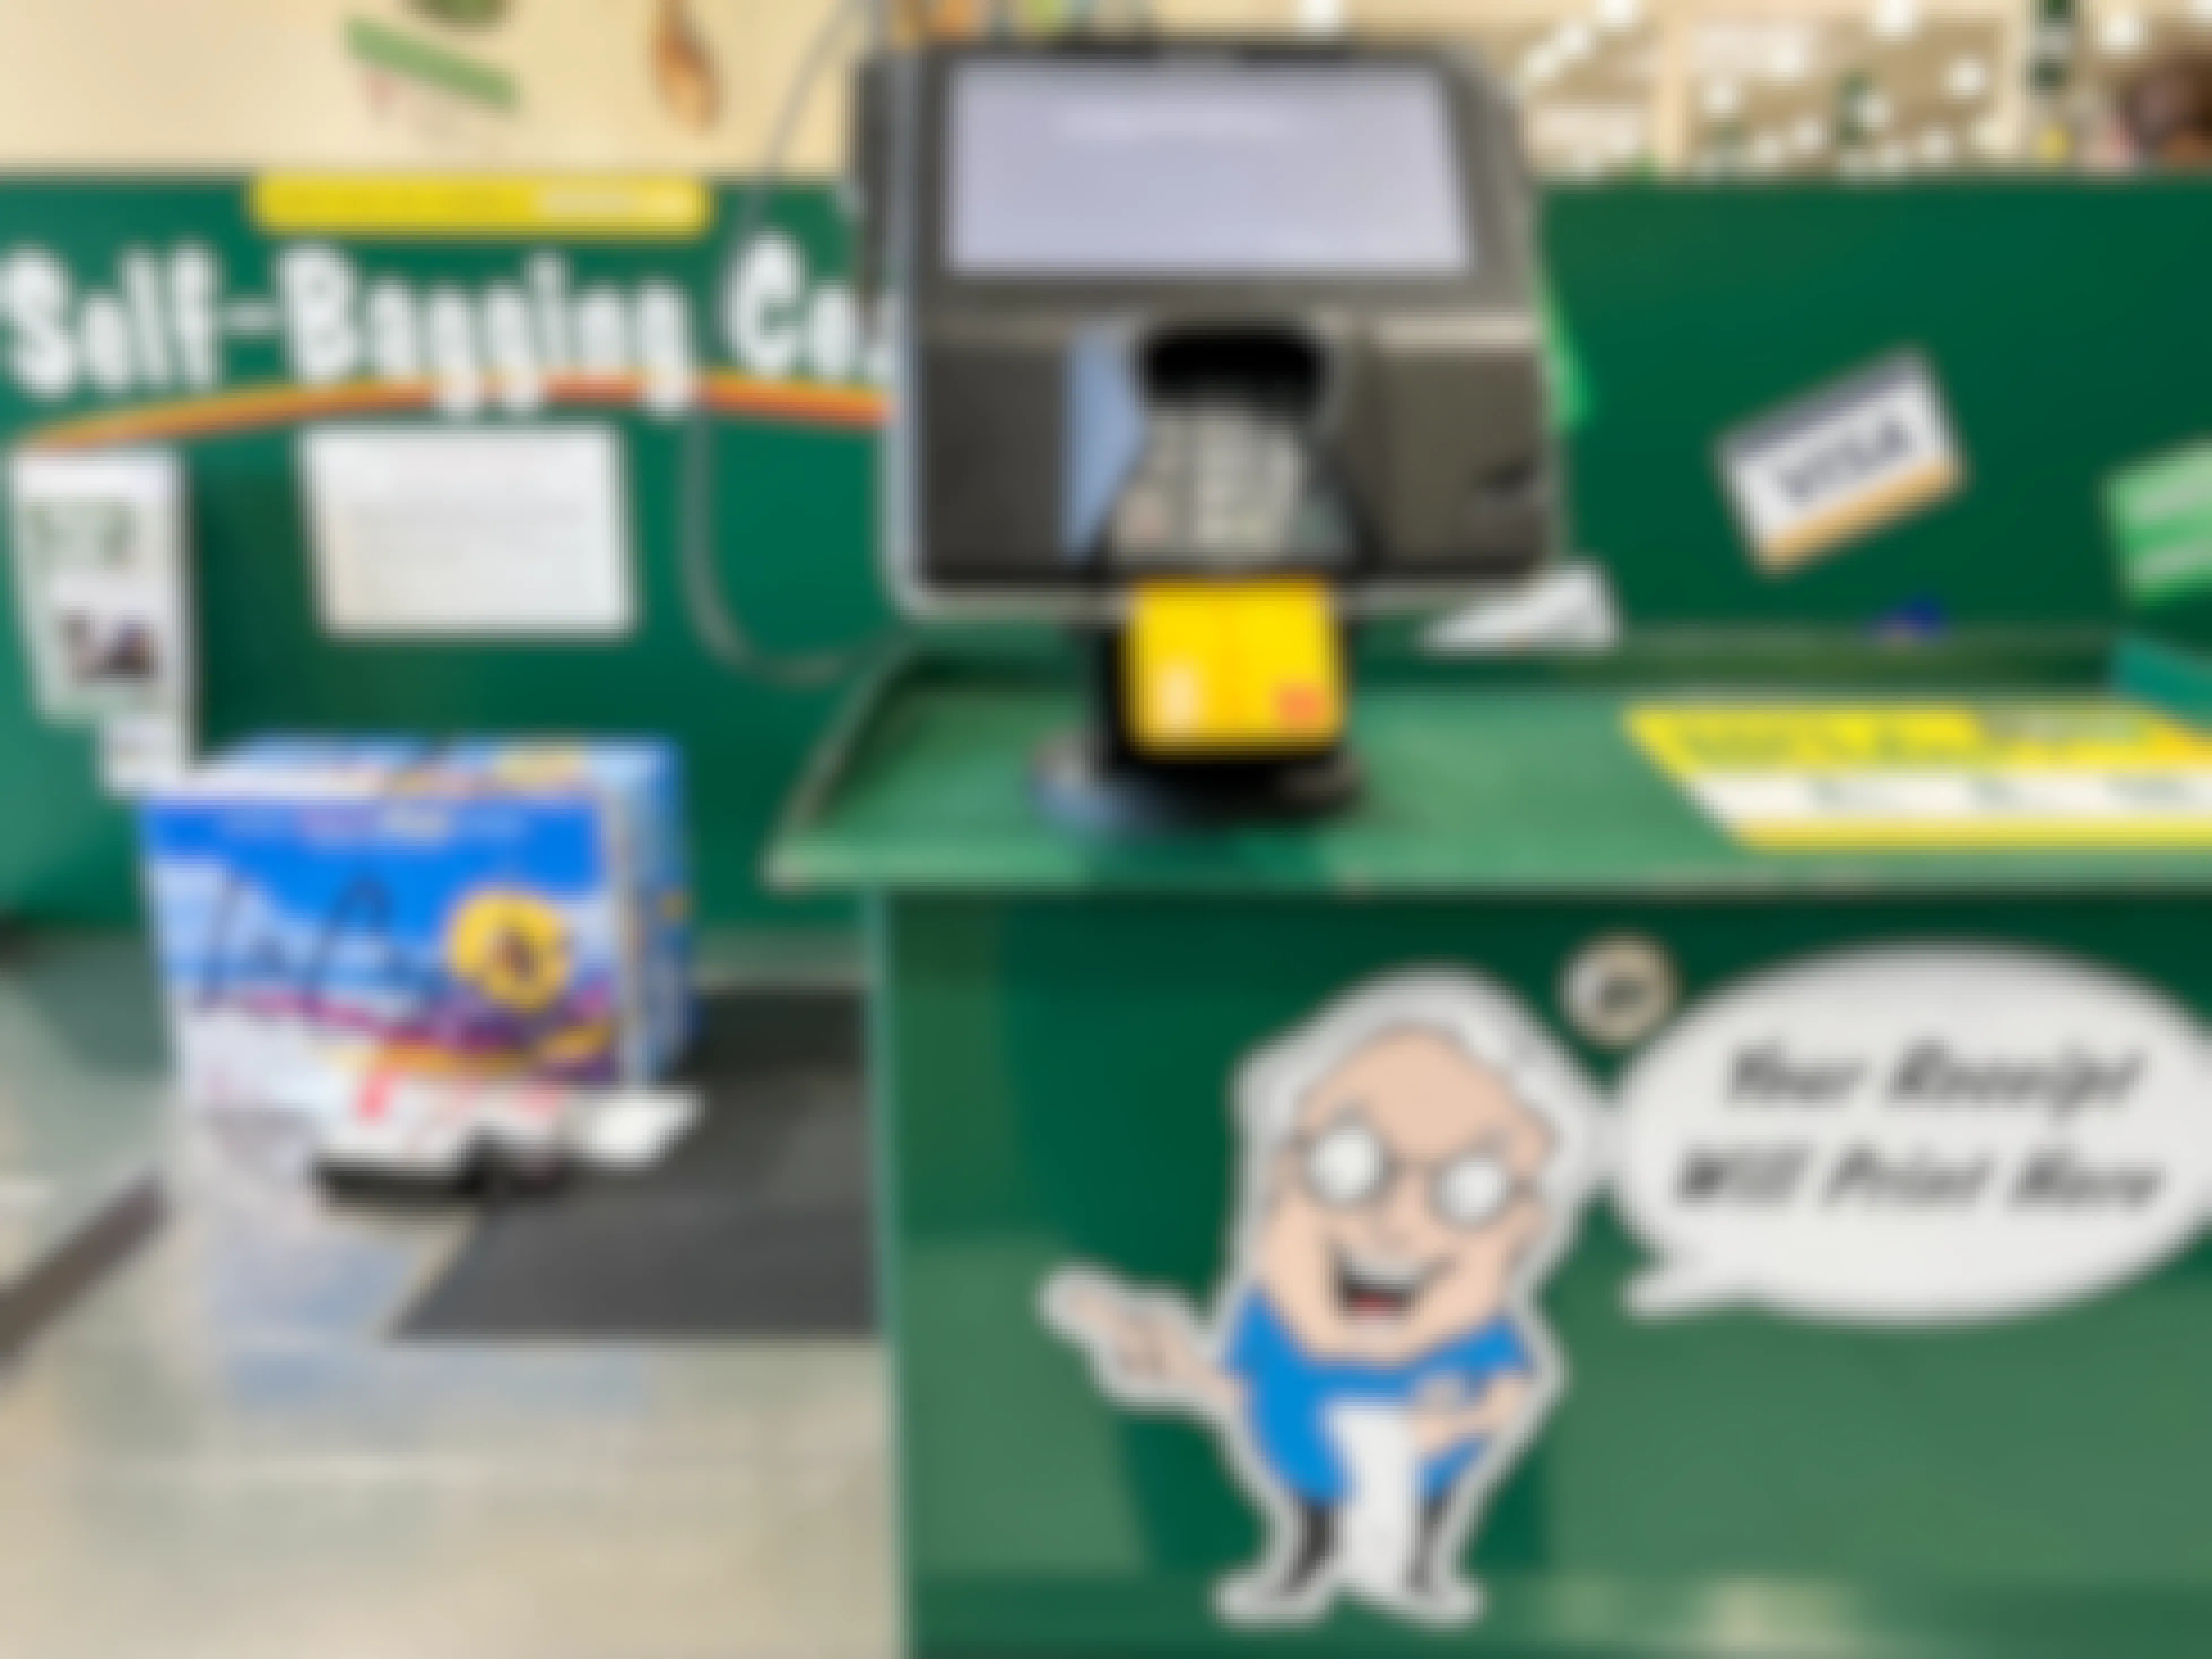 A credit card in a point of sale machine in the checkout lane at Menards with products on the conveyer belt.